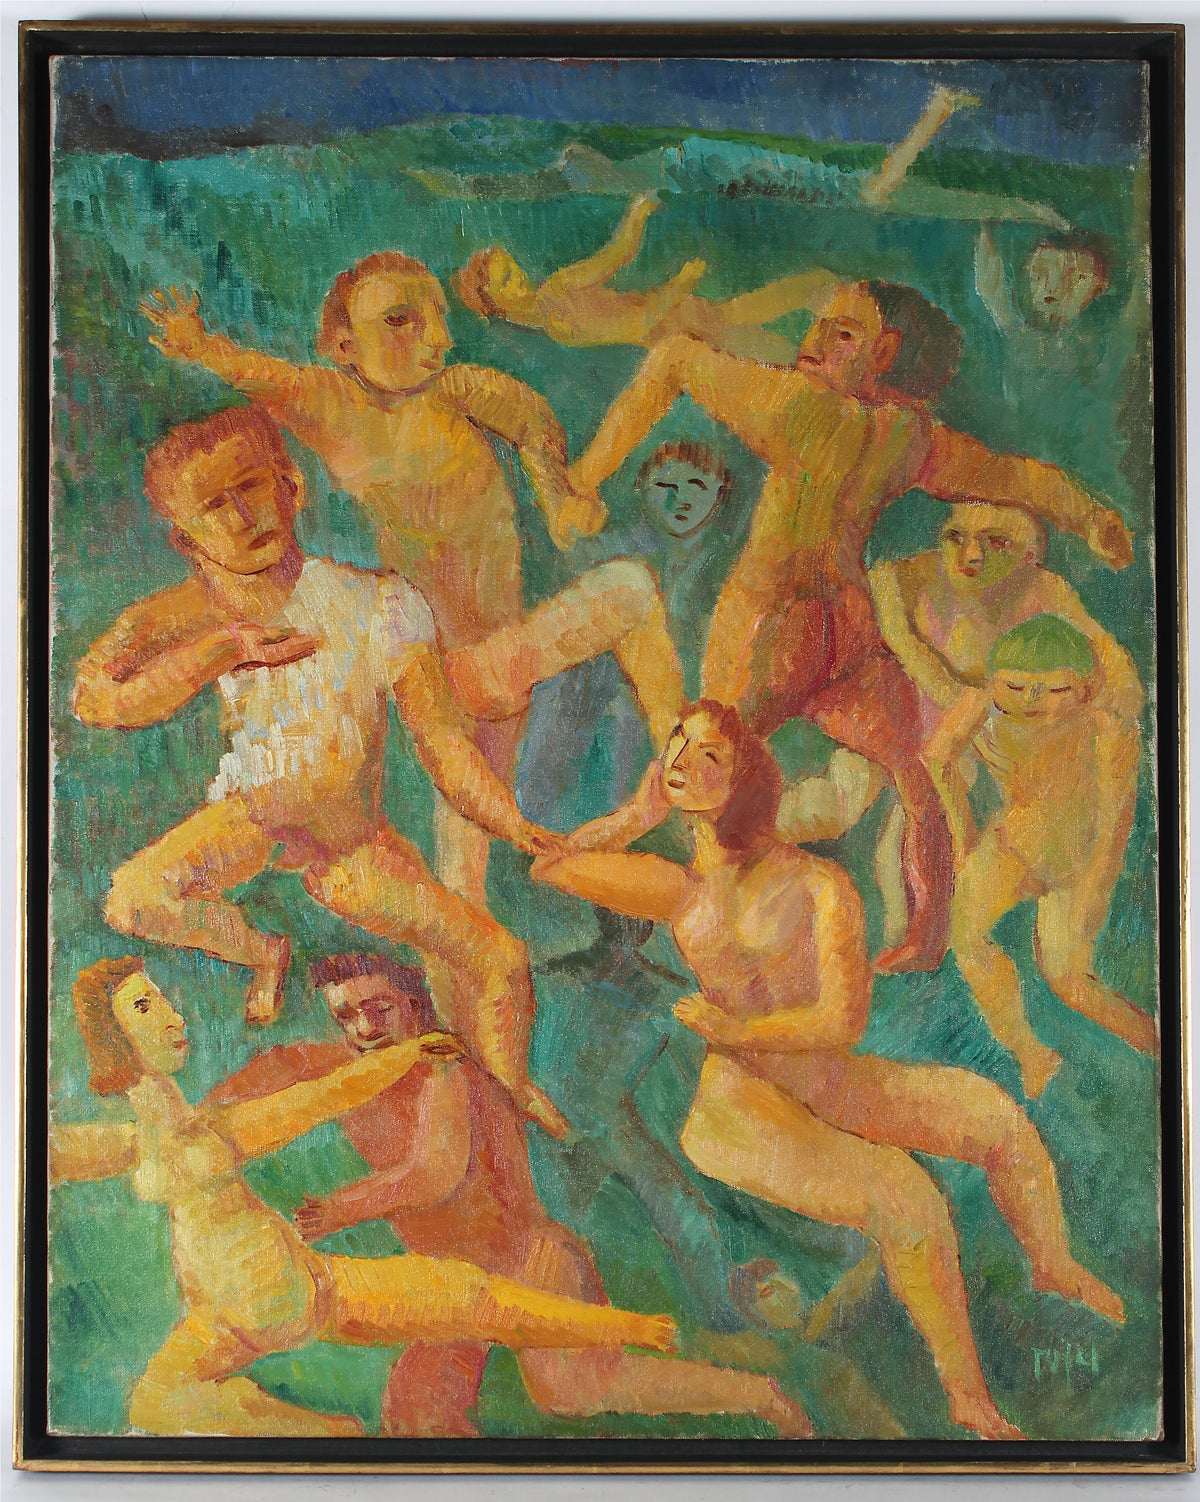 &lt;i&gt;Swimmers&lt;/i&gt; &lt;br&gt;1948 Oil &lt;br&gt;&lt;br&gt;#14005